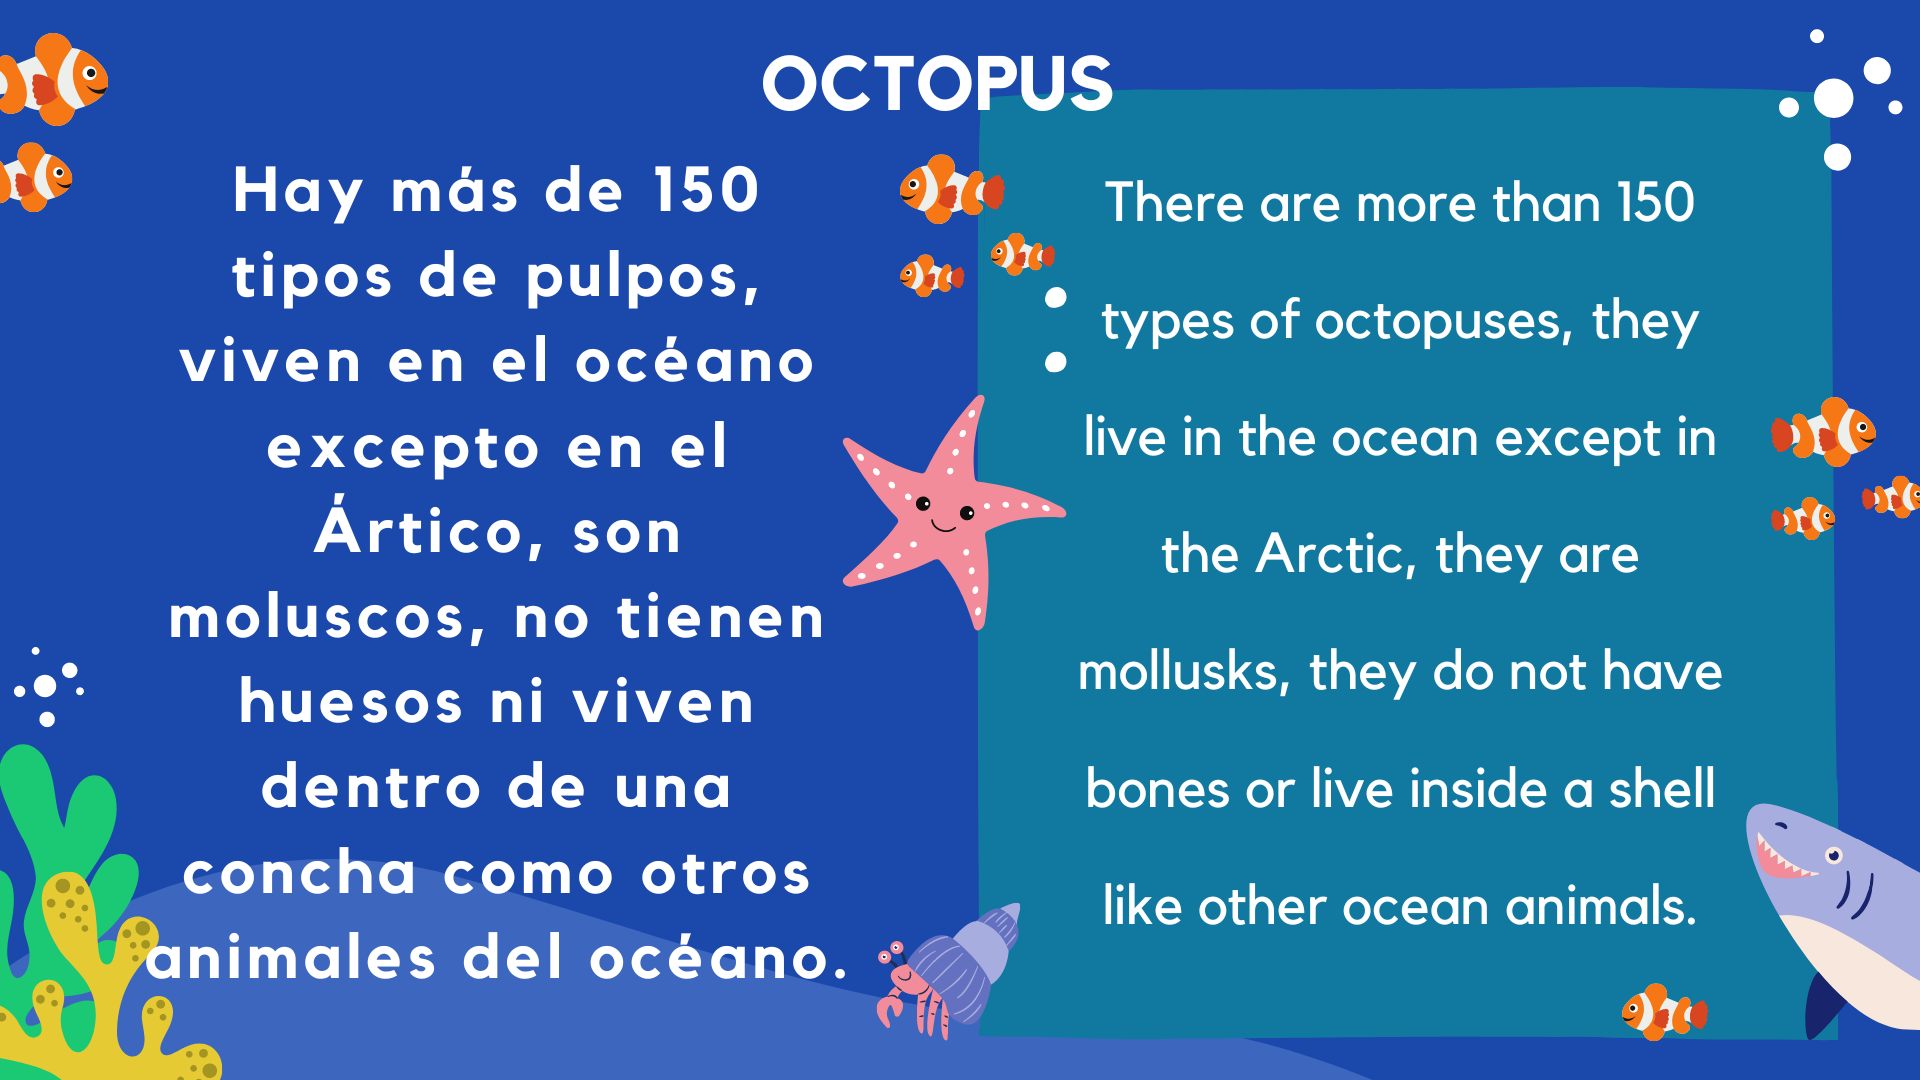 Octopus are one the most fantastic animals in the sea